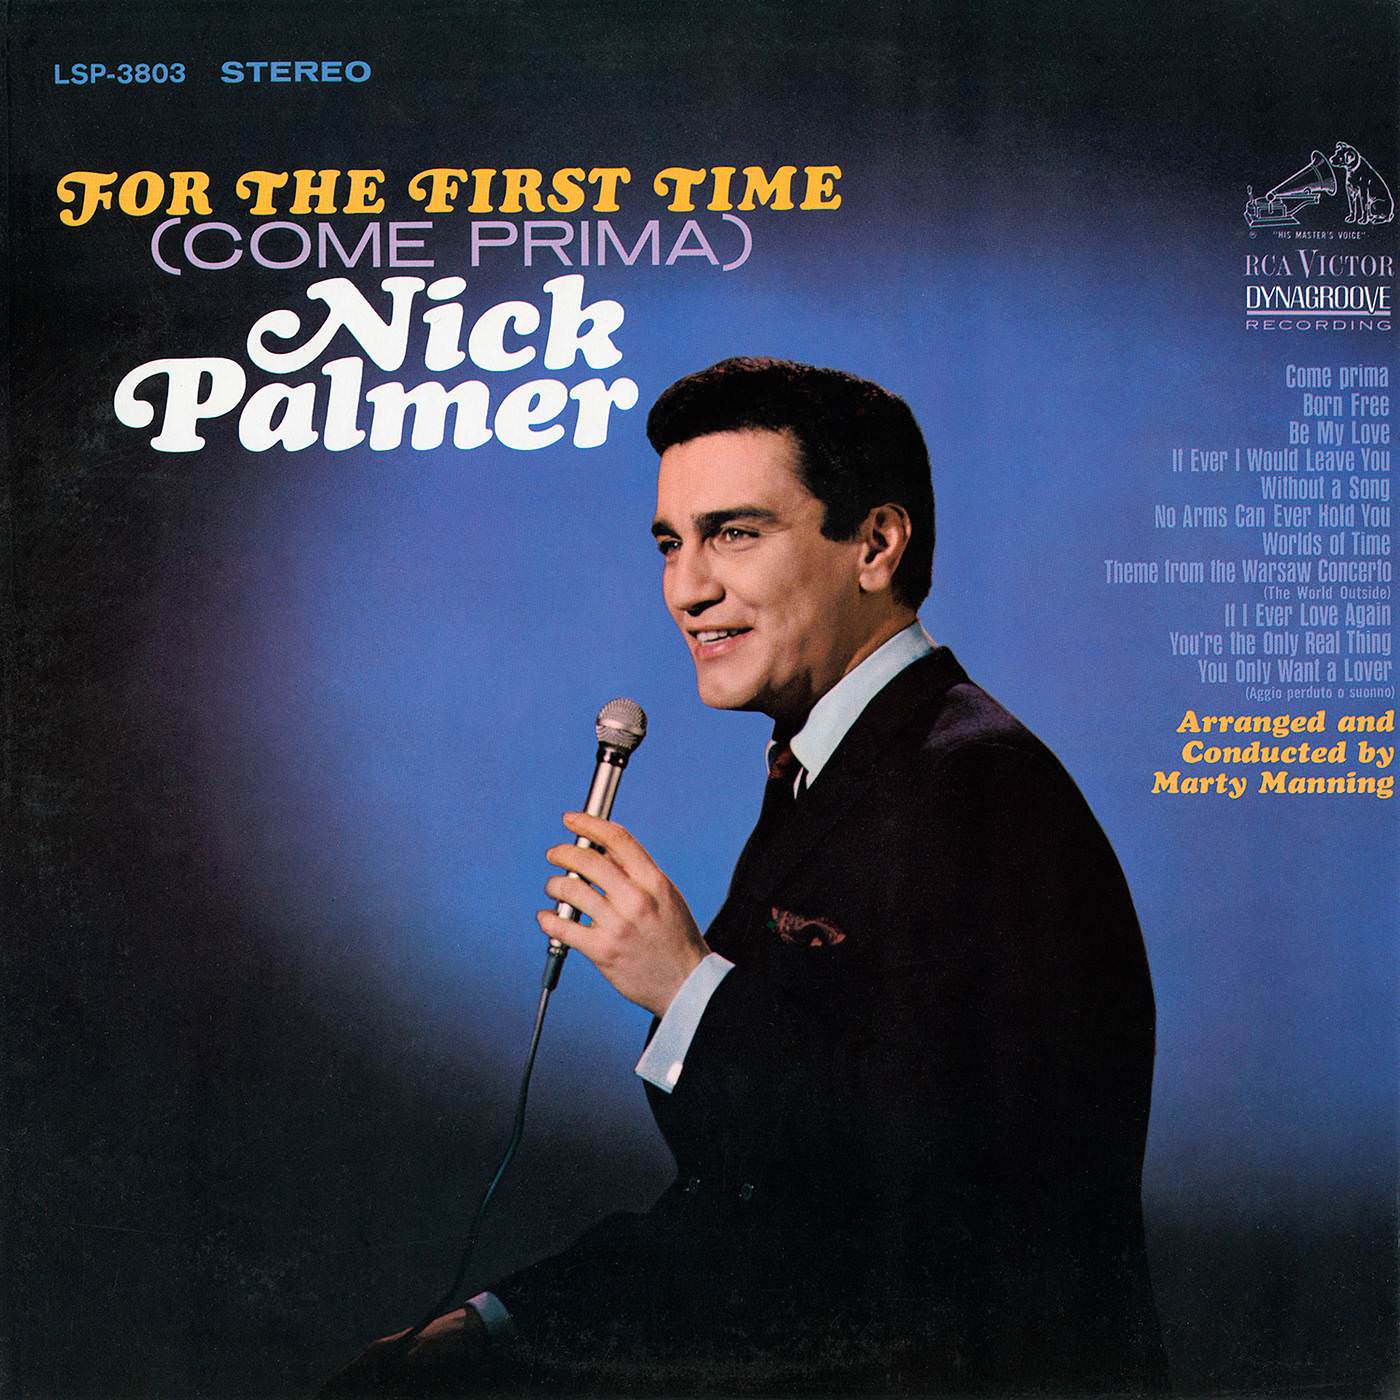 Nick Palmer - For The First Time (1967/2017) [AcousticSounds FLAC 24bit/192kHz]